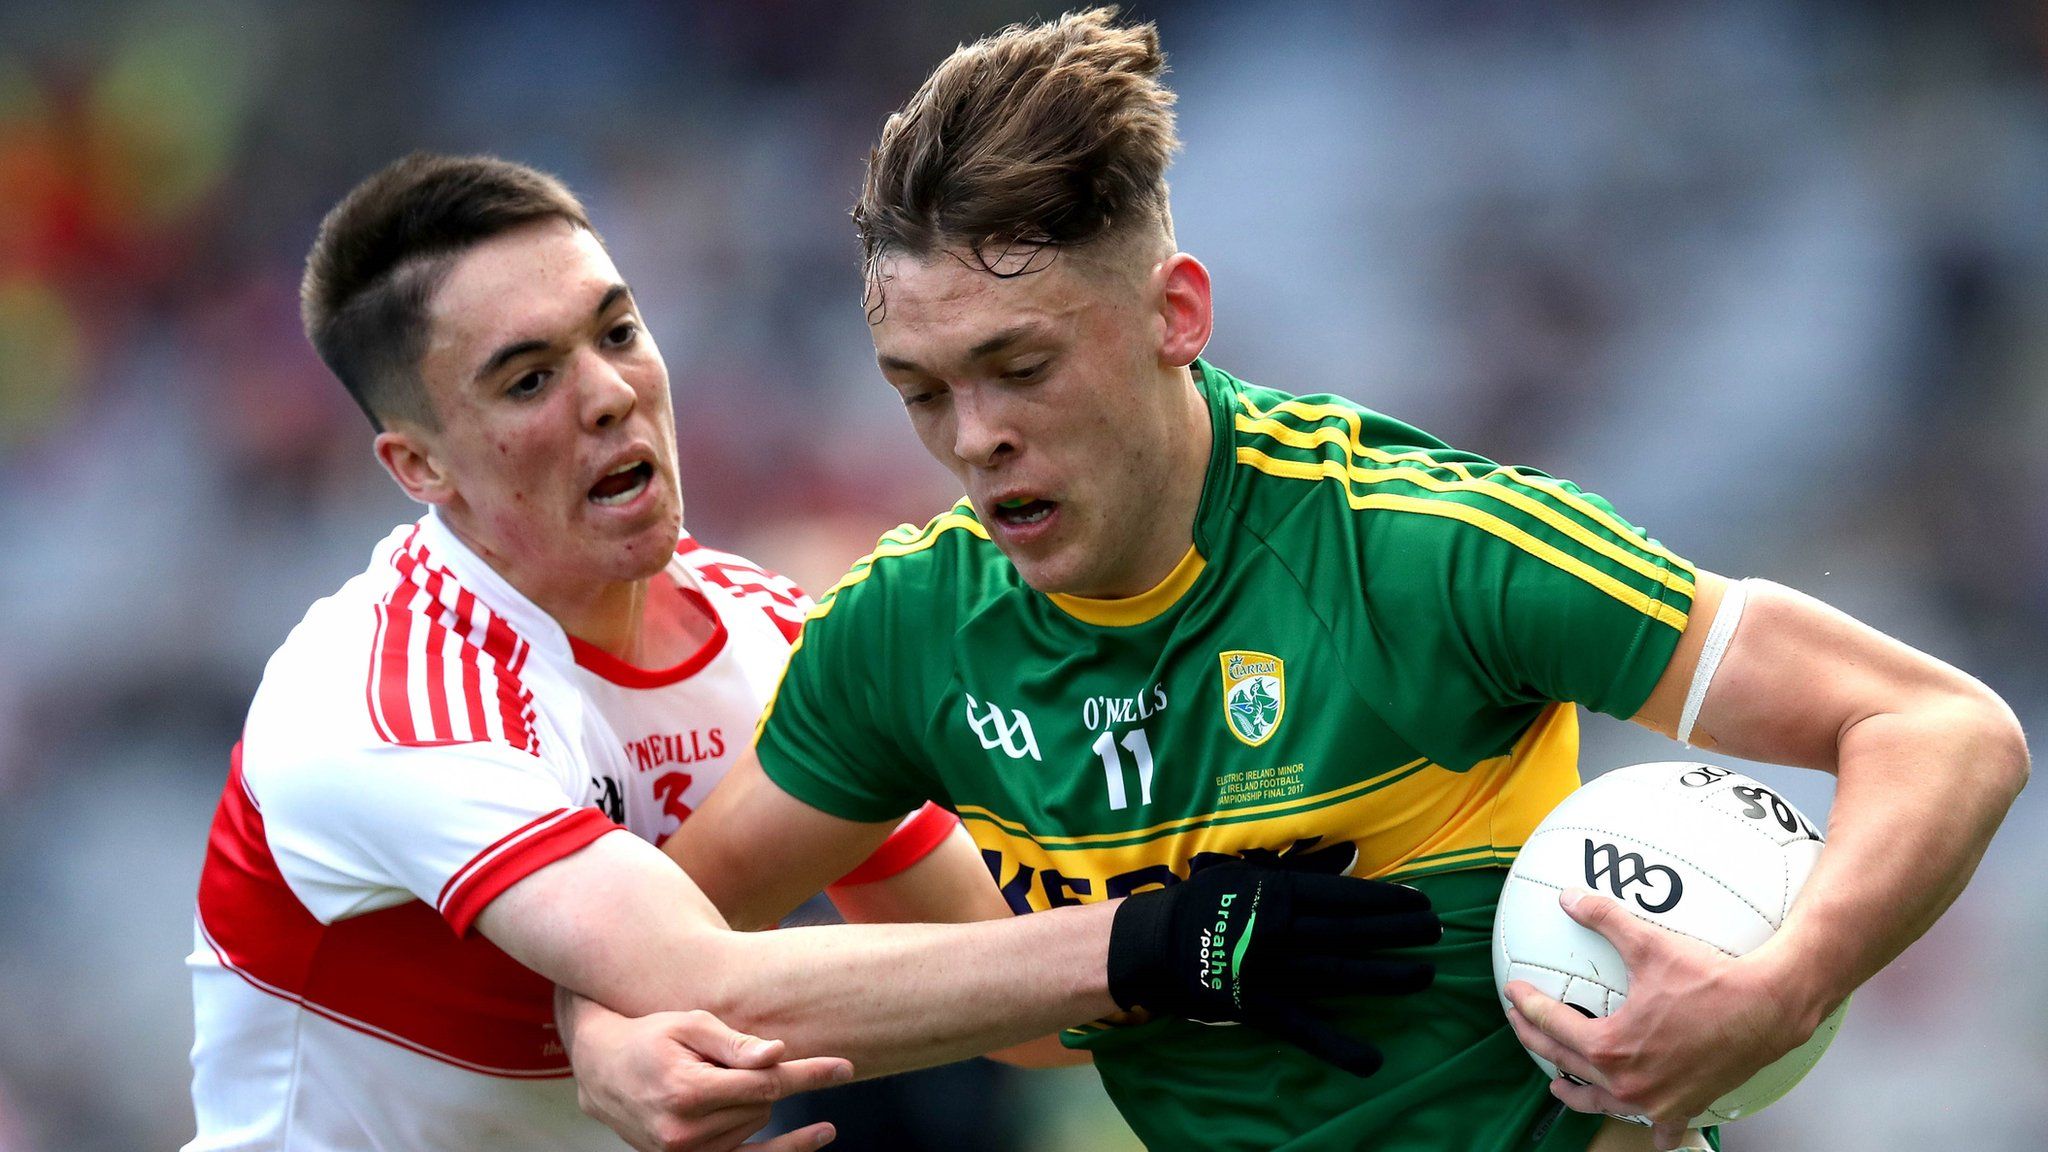 Derry's Conor McCluskey and Kerry's David Clifford will be in opposition in Sunday's second All-Ireland Football semi-final at Croke Park